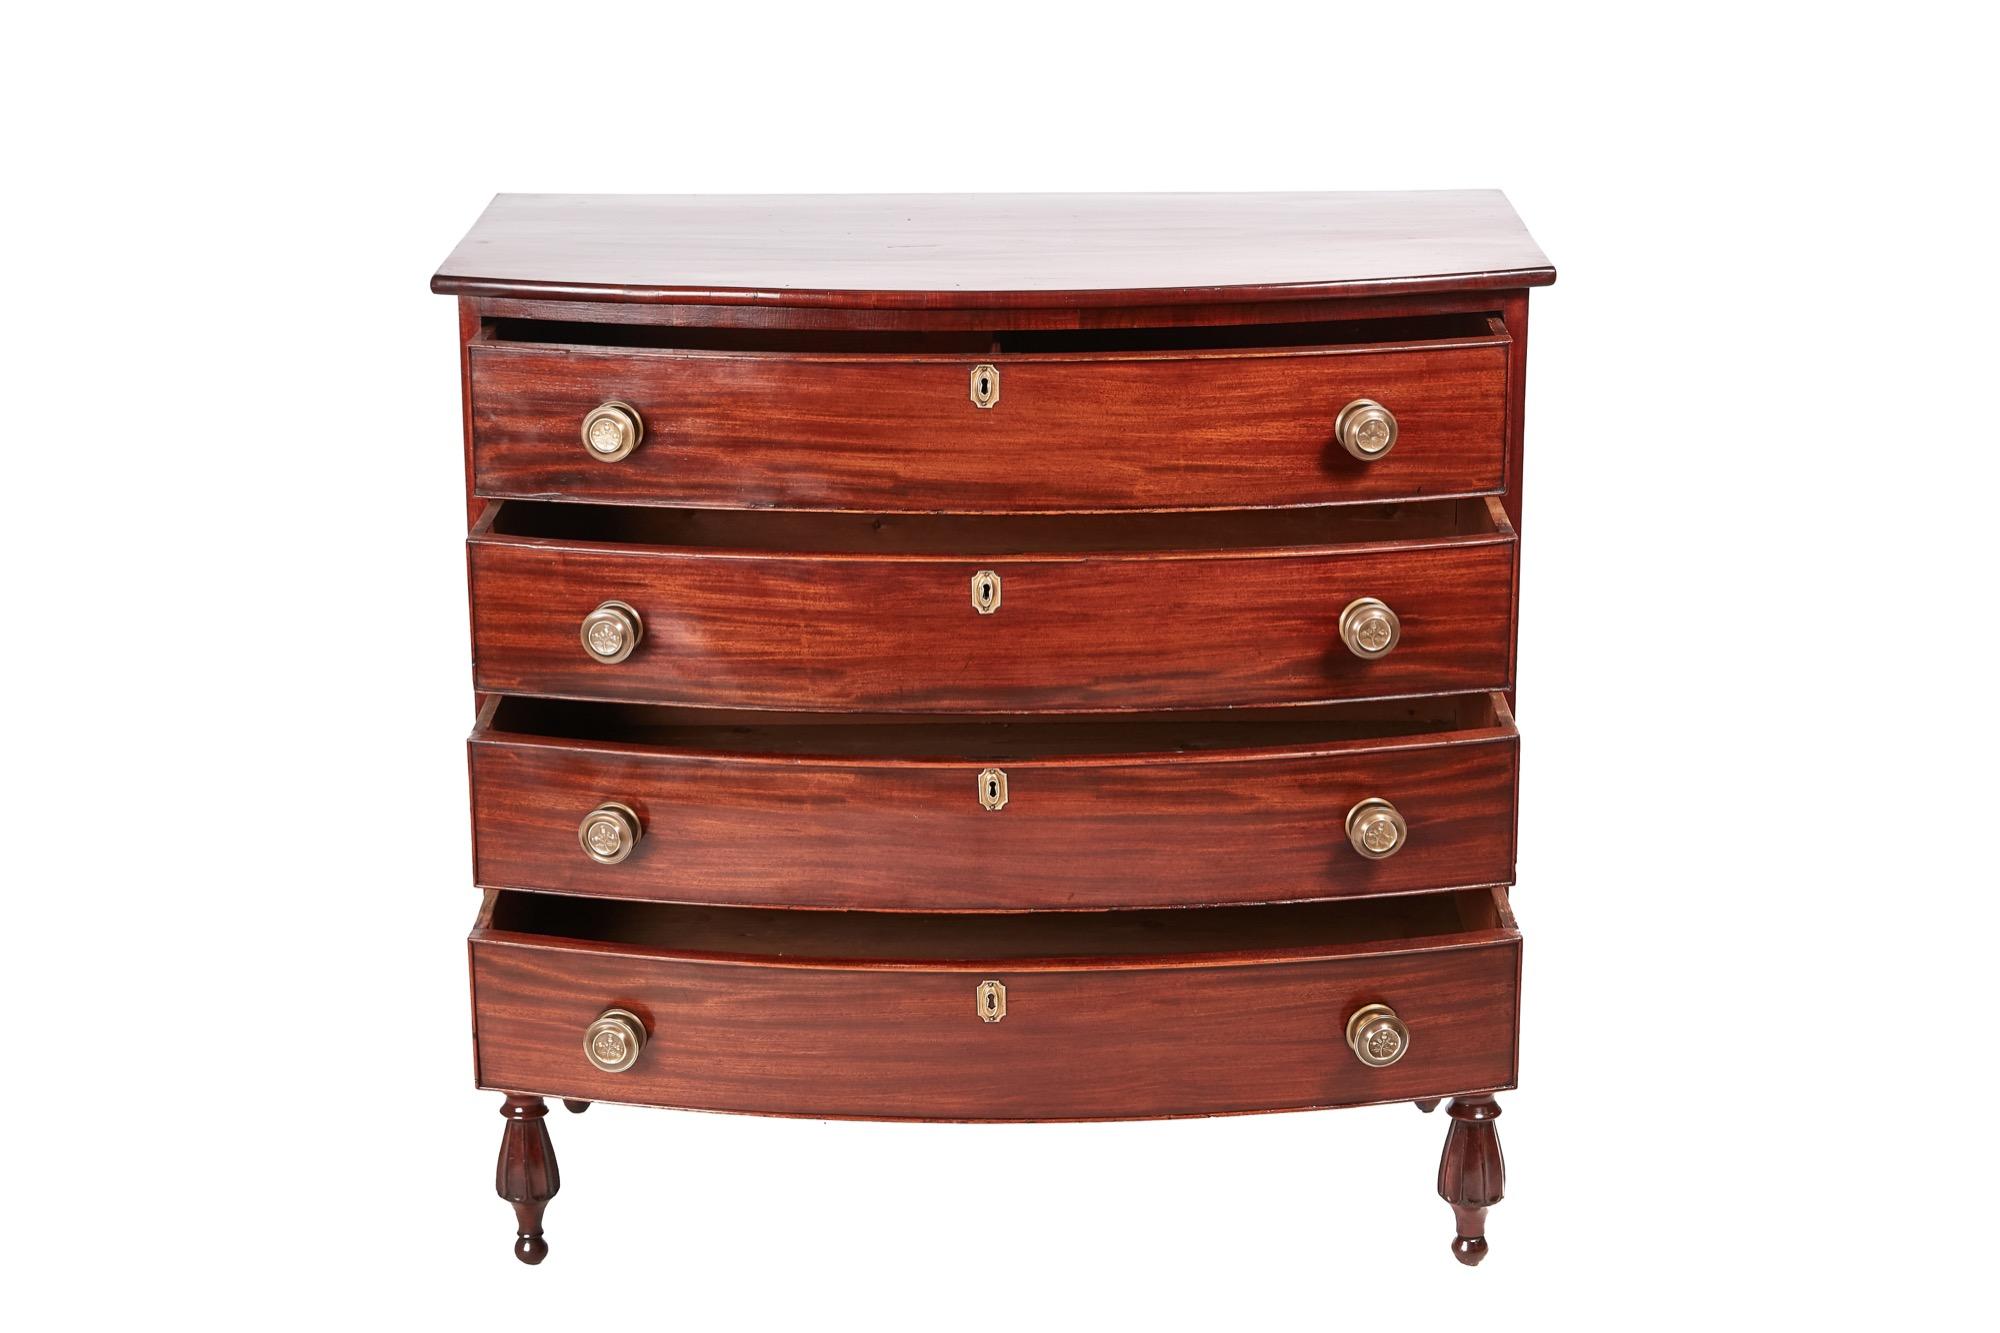 Fine American antique mahogany bowfront chest of drawers, having a lovely quality bowfront top, four long drawers with brass handles, shaped apron supported by four unusual shaped turned feet,
Lovely color and condition
Measure: 42